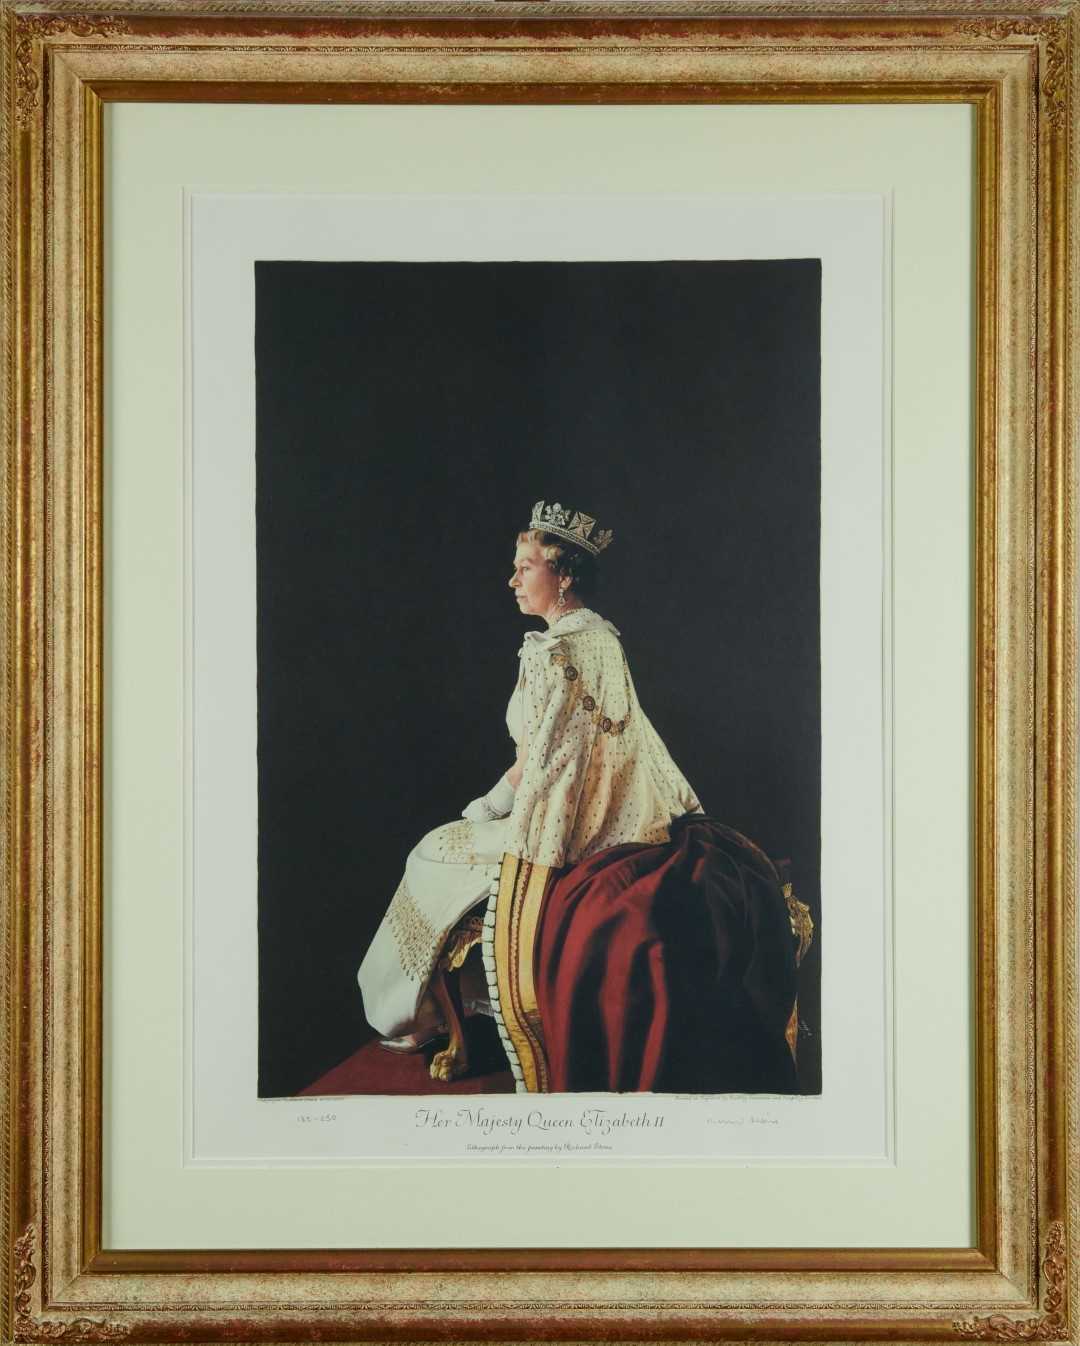 Lot 128 - Richard Stone (b. 1951), signed limited editon lithograph - Portrait of HM Queen Elizabeth II, signed by the artist in pencil and numbered 183/250